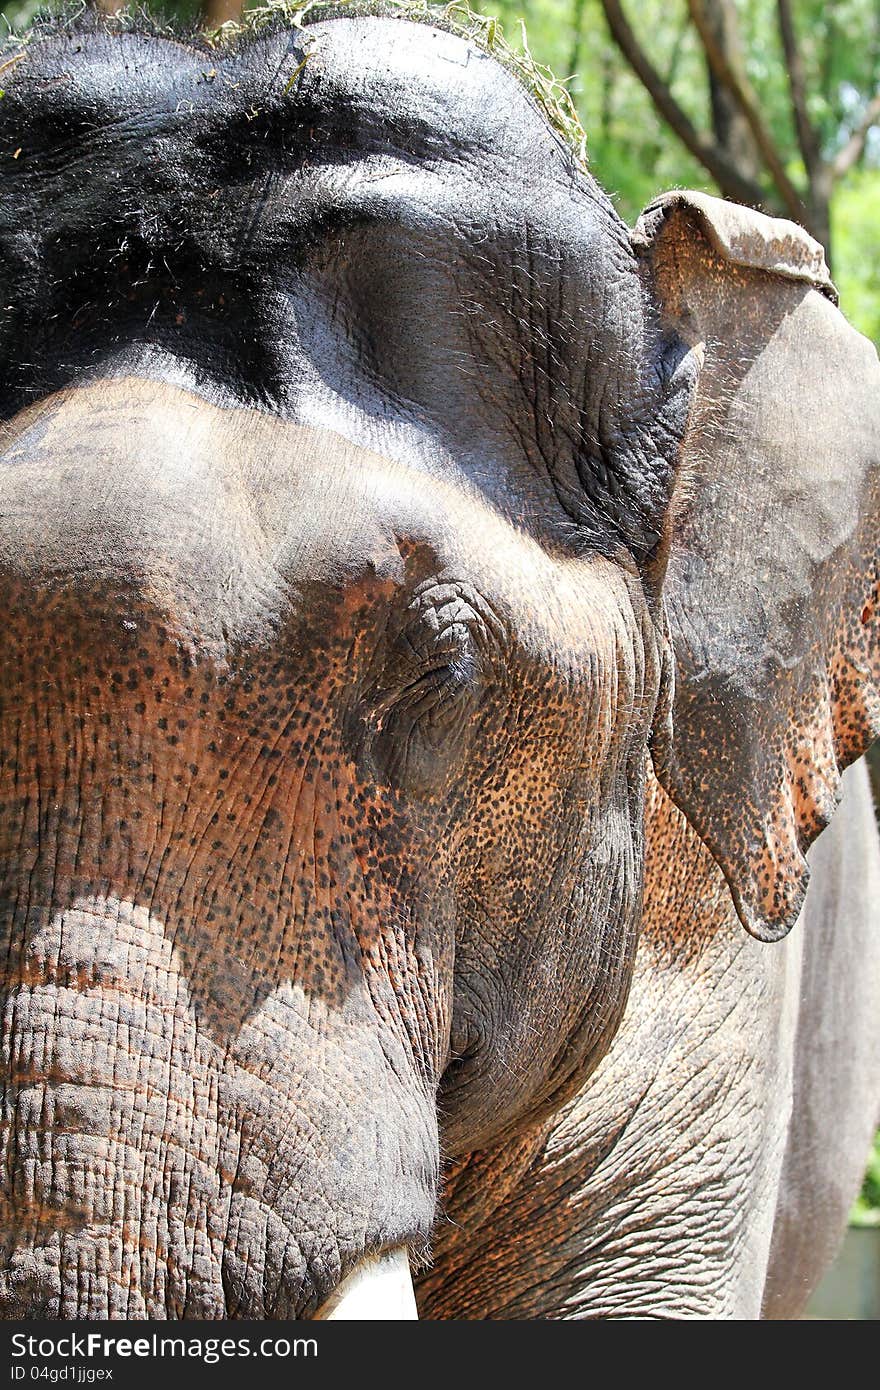 Asian elephant closeup photo of its head and showing extremely think and hairy skin with spots on the face. Asian elephant closeup photo of its head and showing extremely think and hairy skin with spots on the face